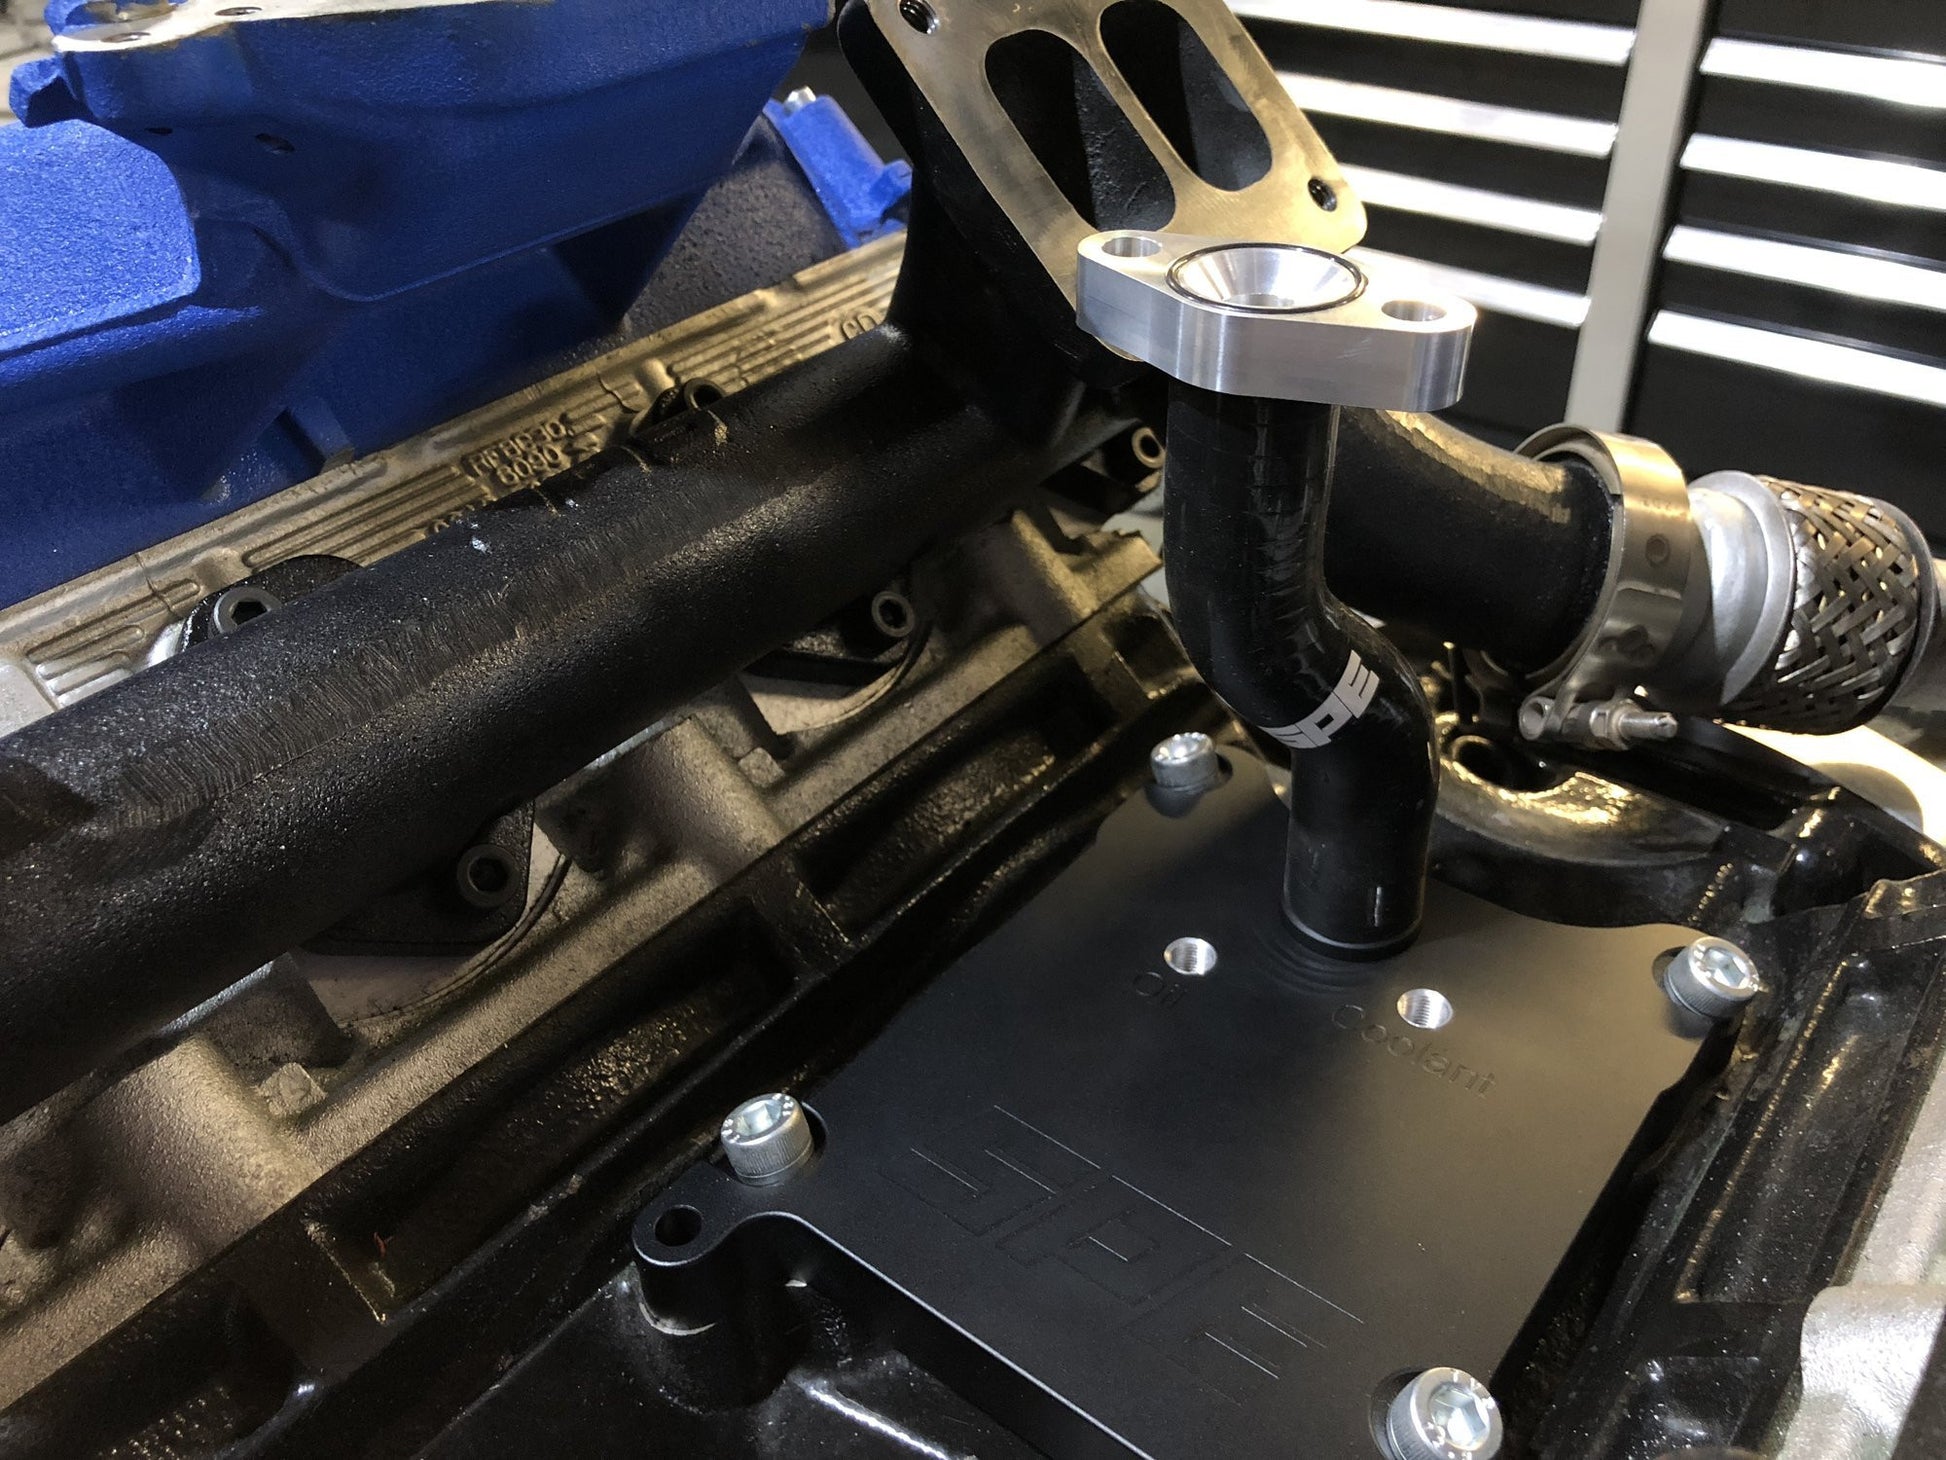 SPE 6.7L EMPEROR T4 MANIFOLD KIT - Engine Intake Manifold - Snyder Performance Engineering (SPE) - Texas Complete Truck Center